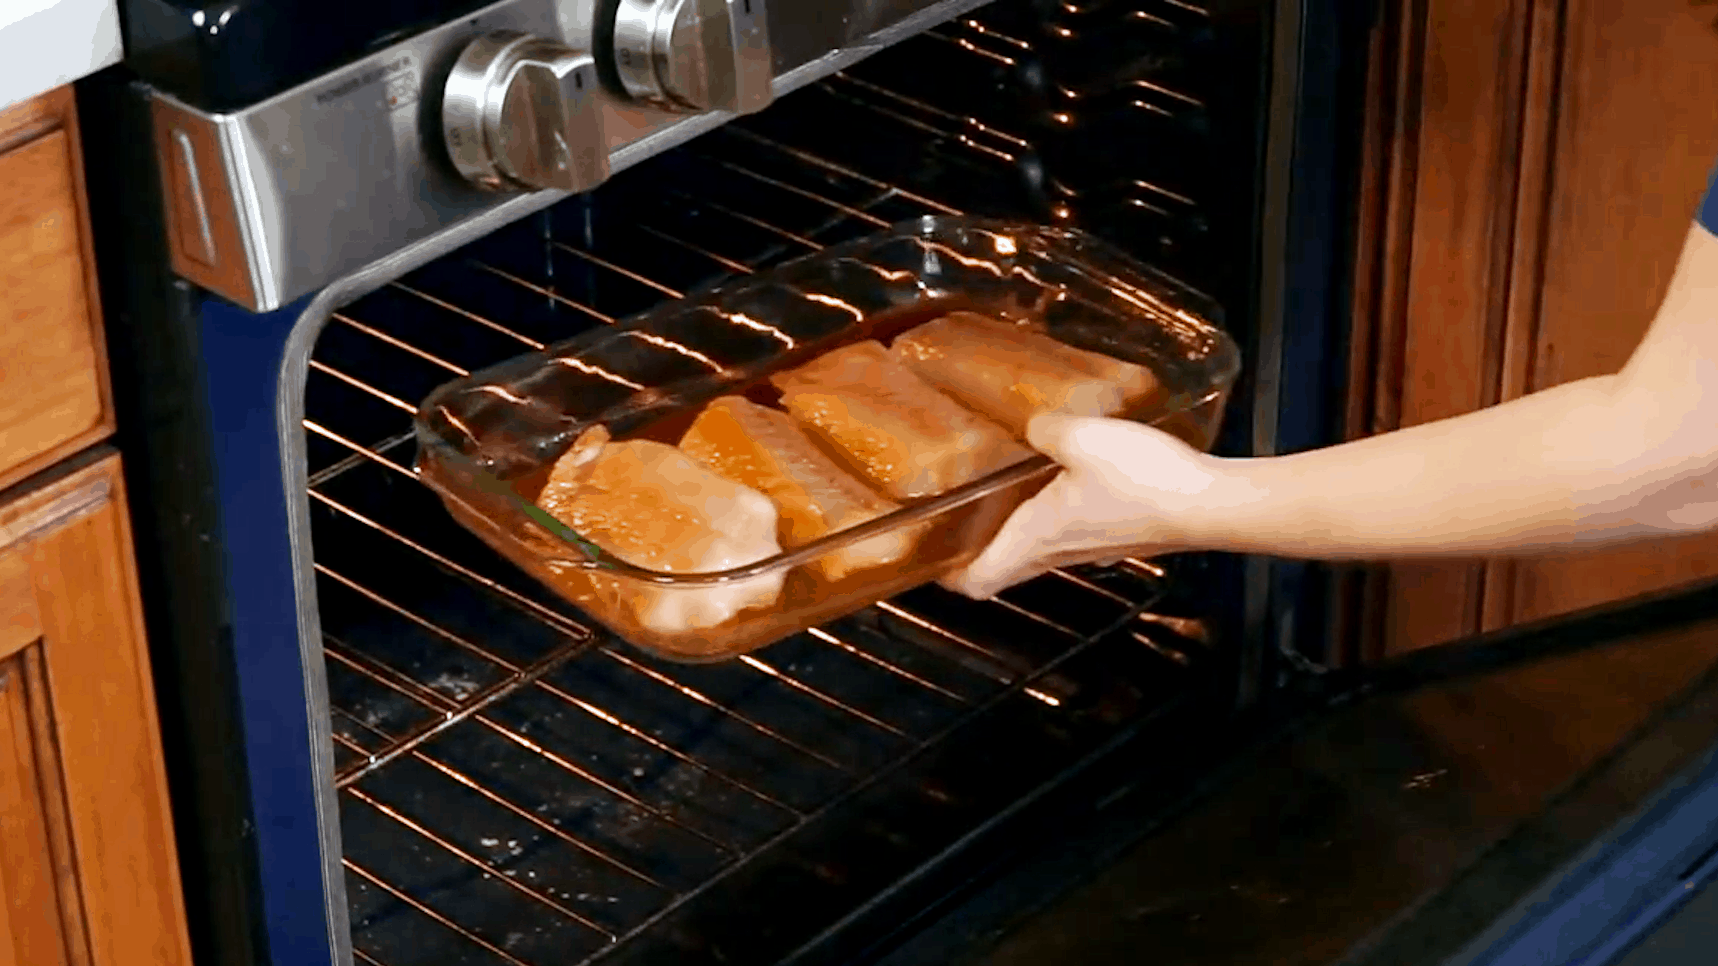 Glass 9x13 pan with 4 mahi mahi filets being placed in the oven